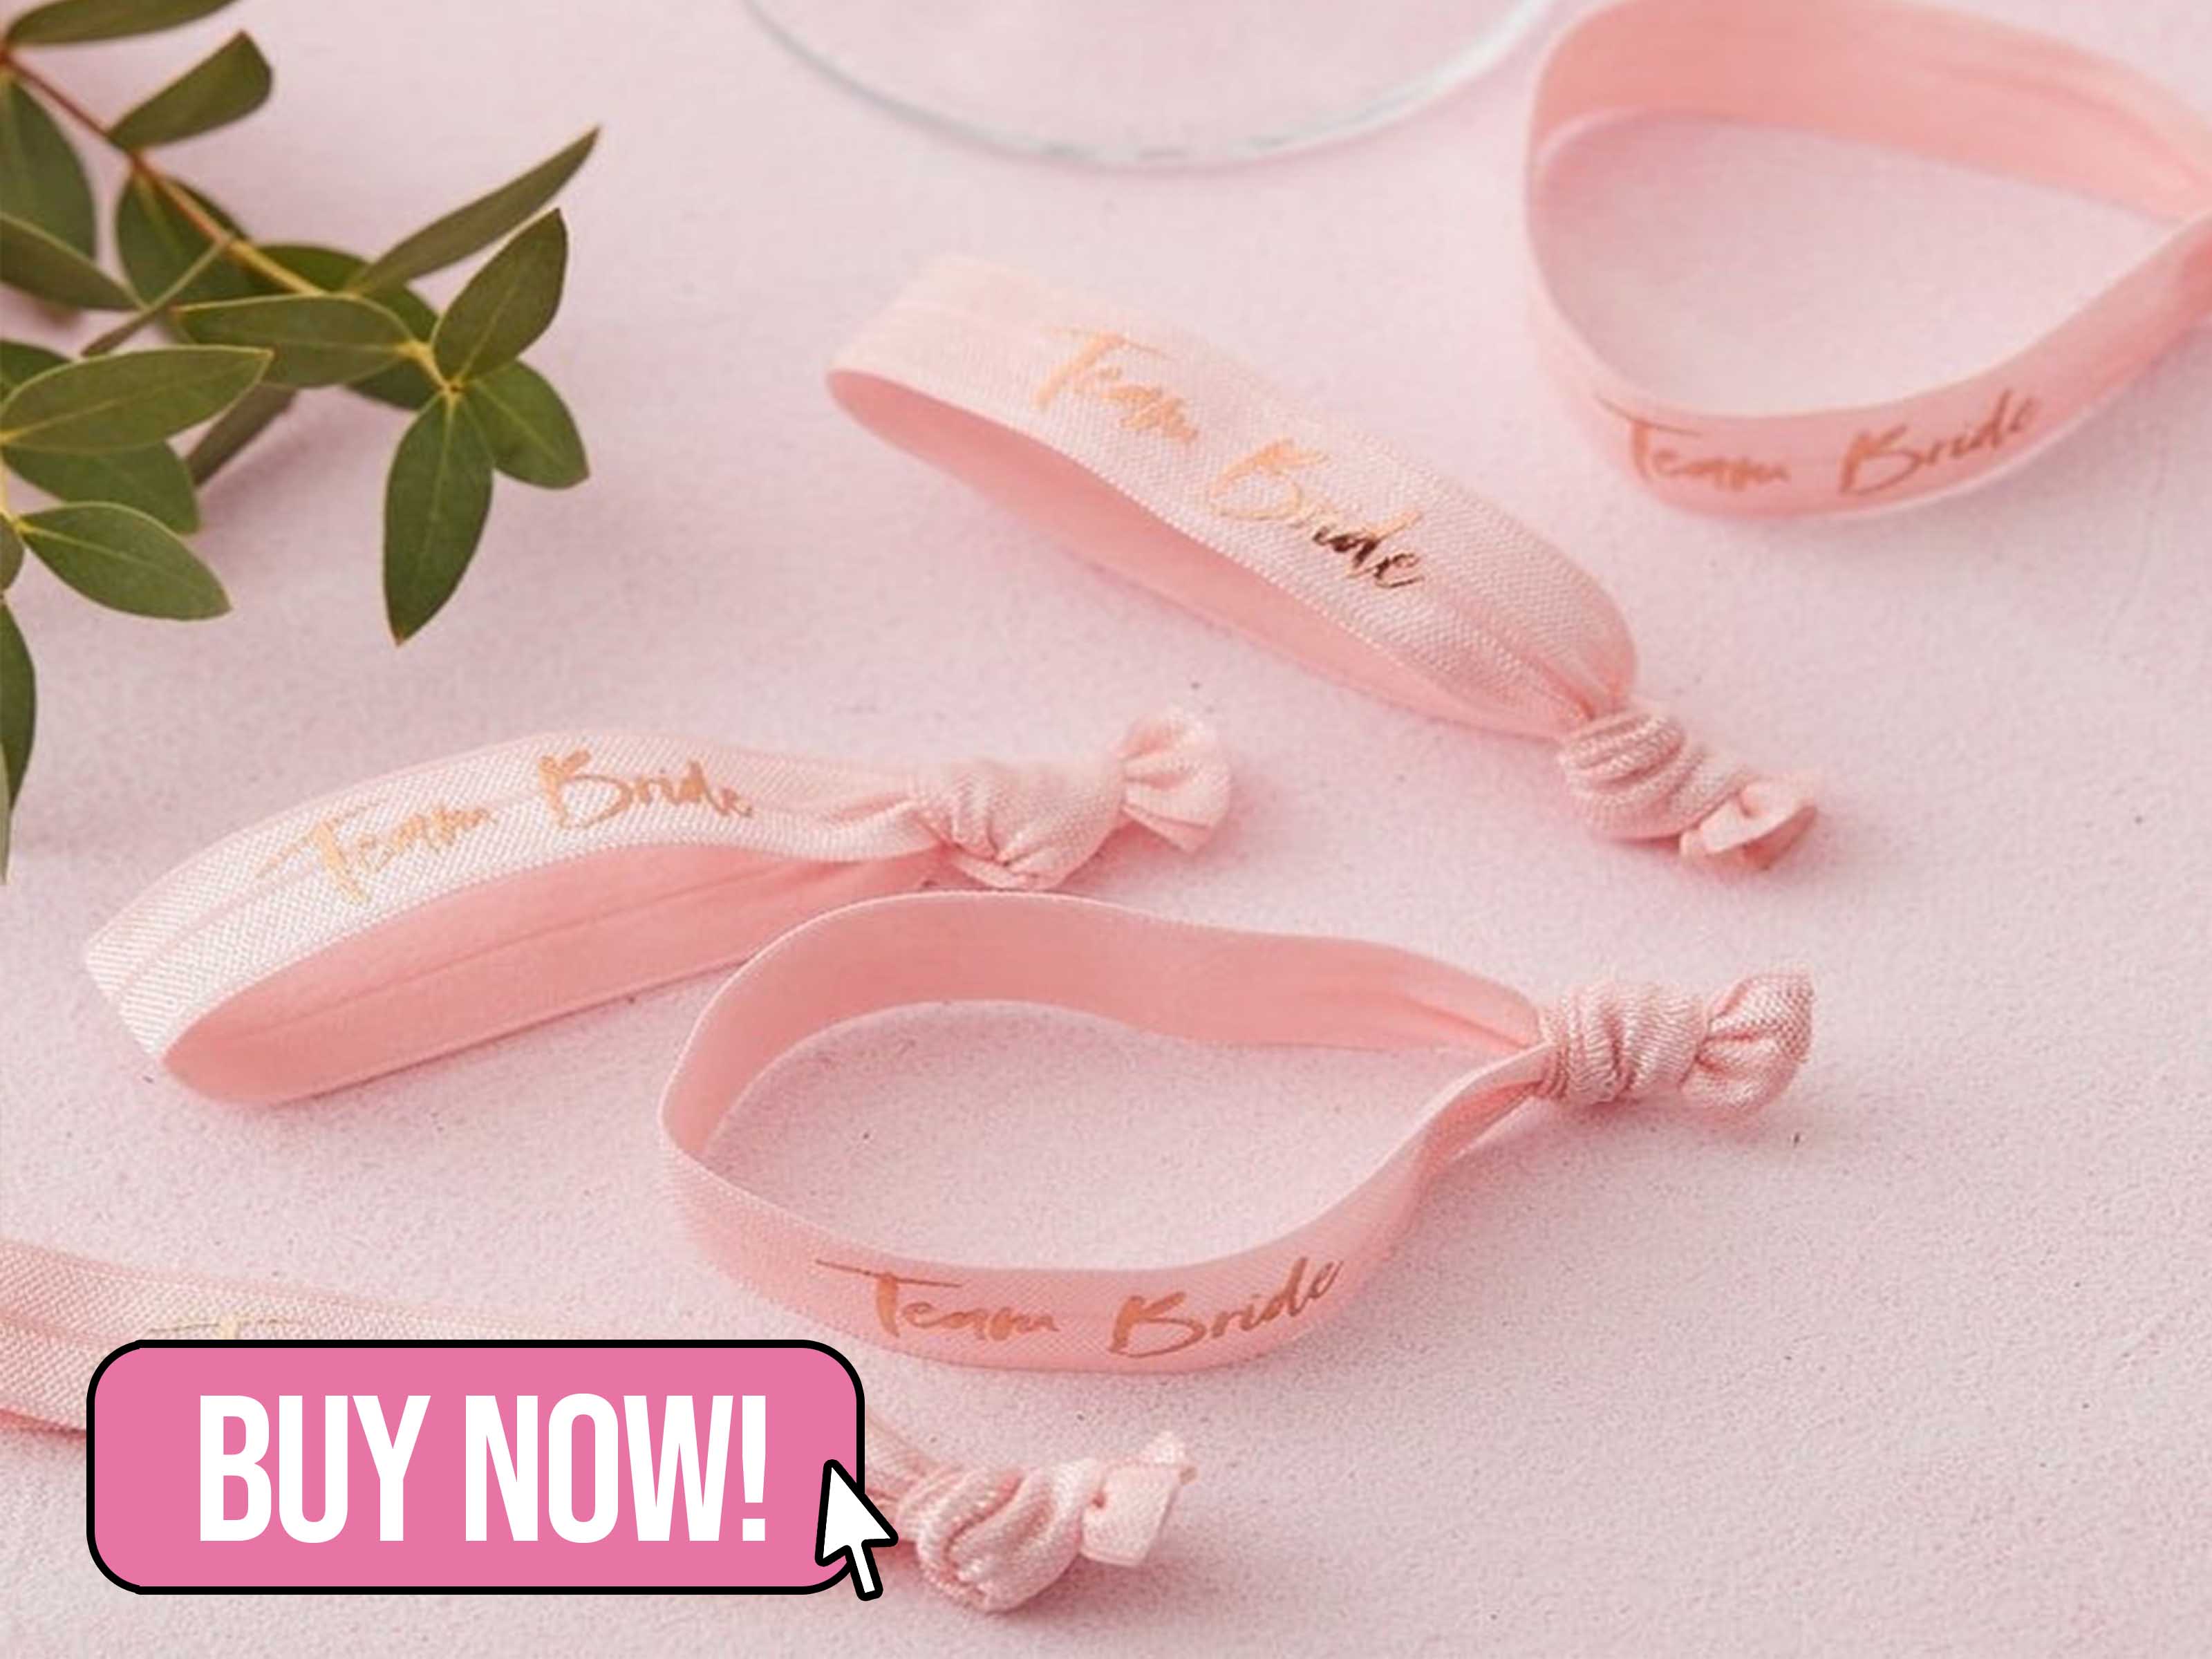 Classy Hen Party Accessories